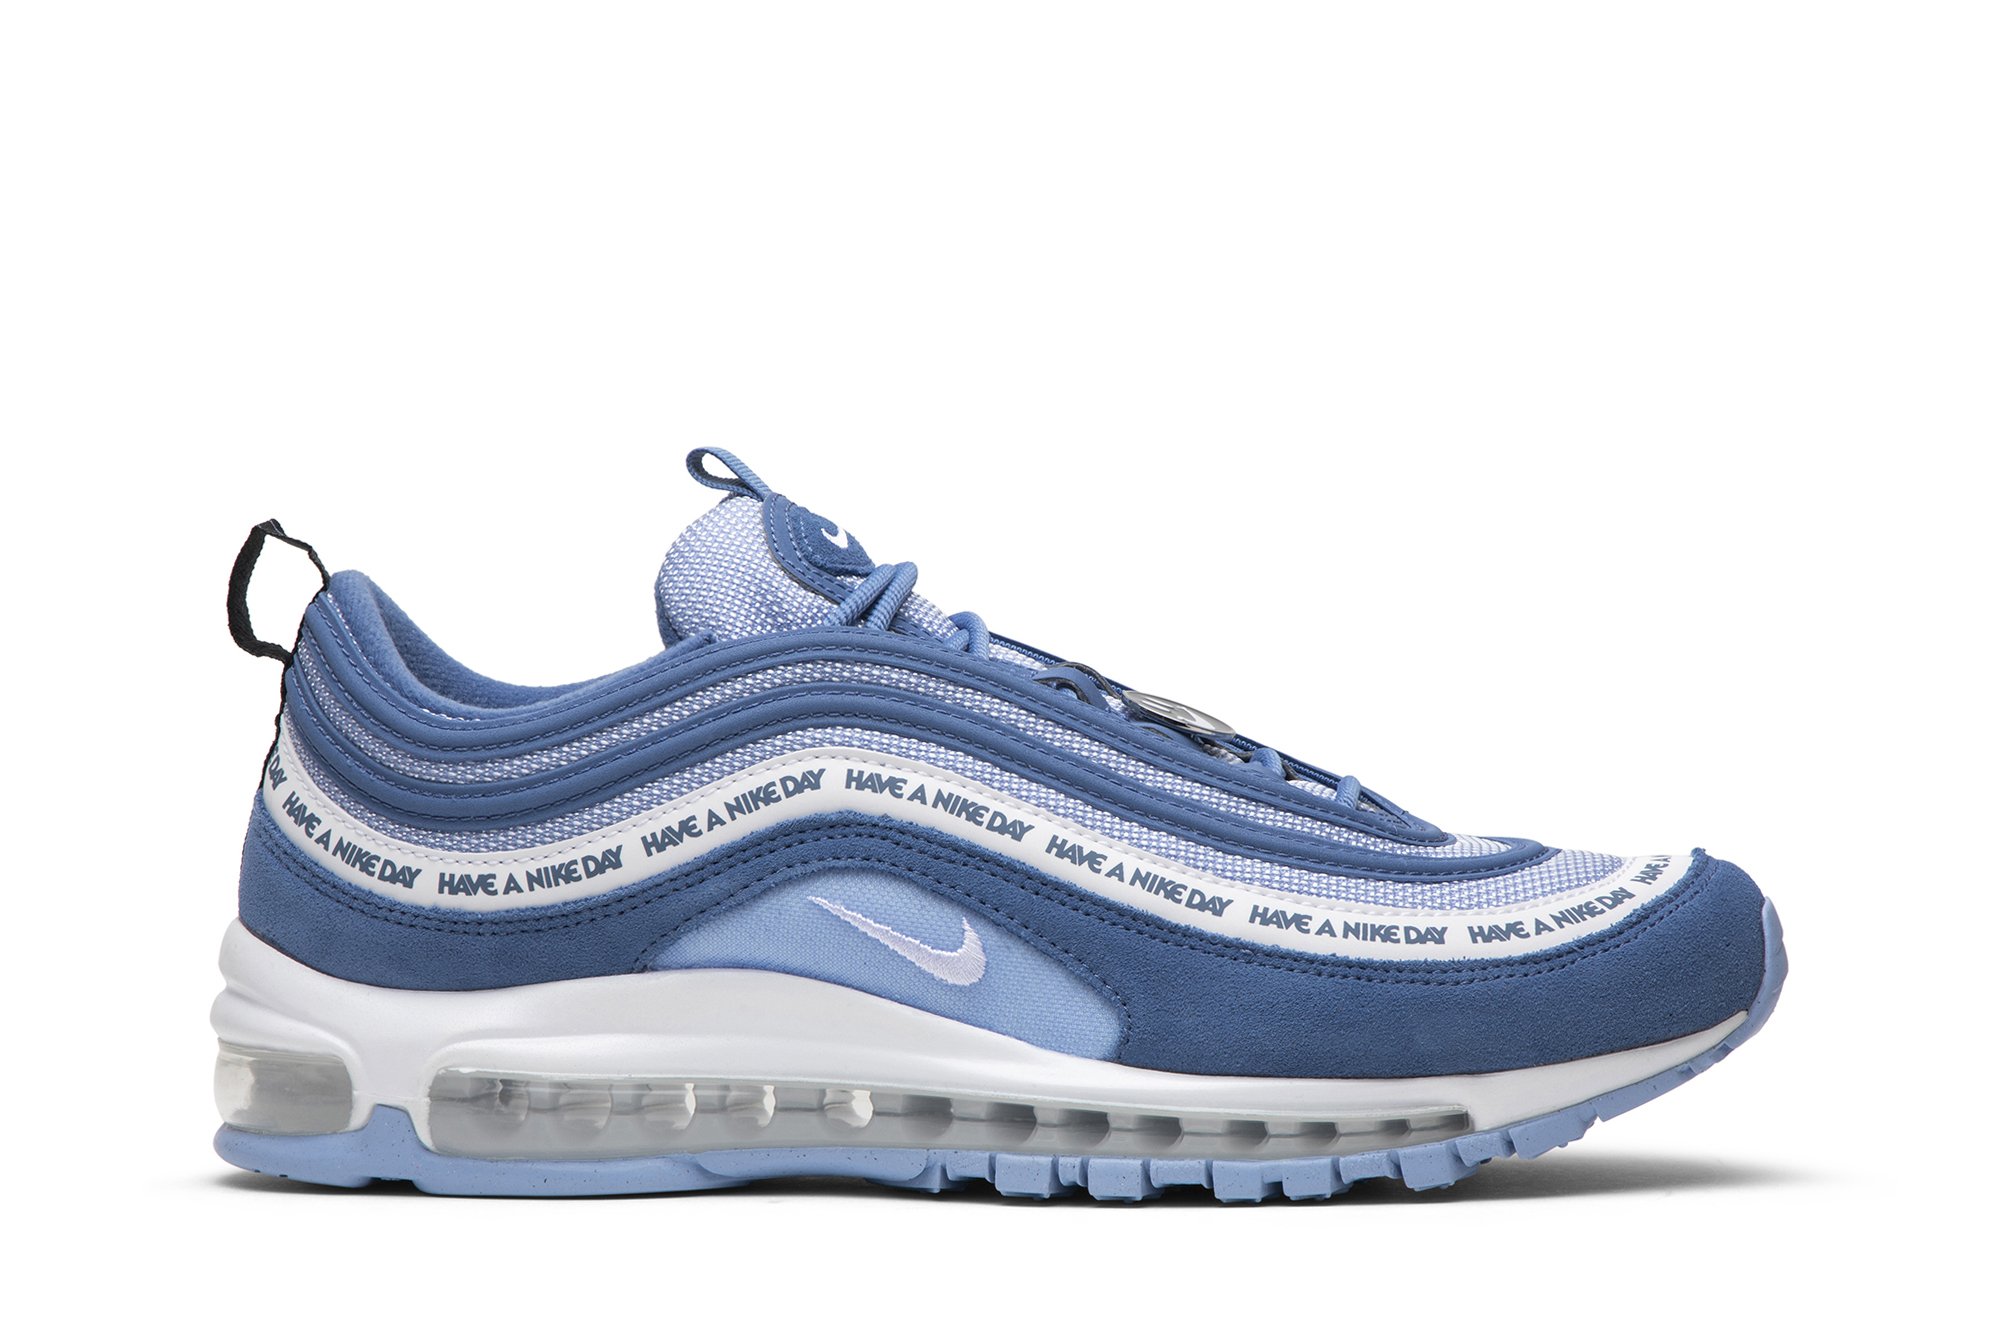 Buy Air Max 97 'Have A Nike Day' - BQ9130 400 | GOAT